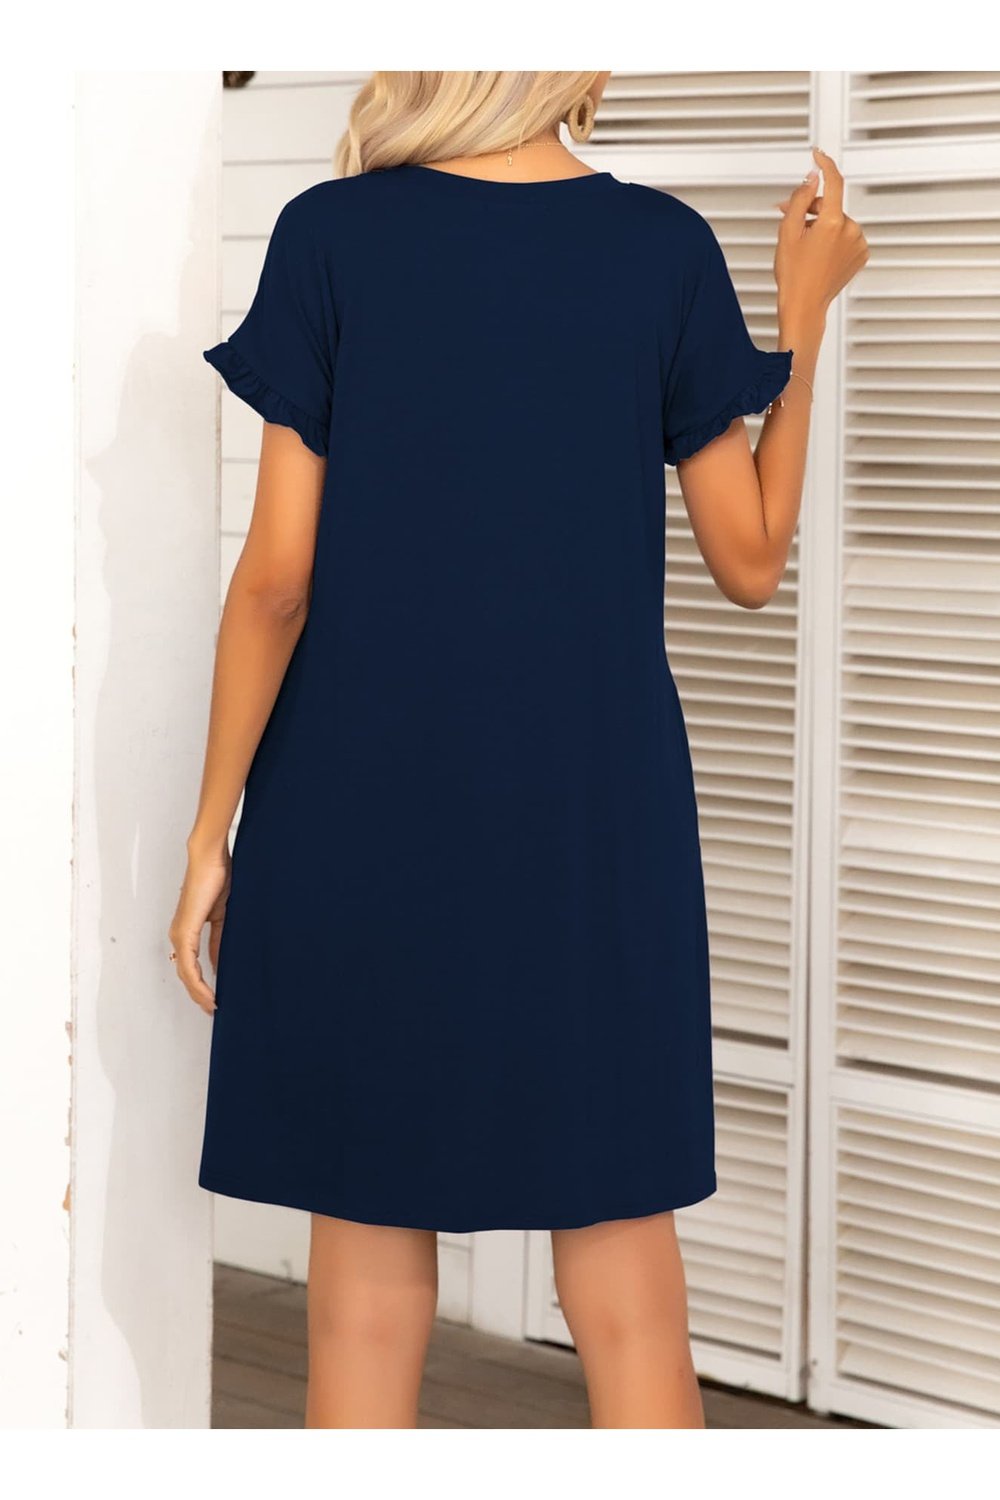 Round Neck Flounce Sleeve Dress with Pockets - Casual & Maxi Dresses - FITGGINS